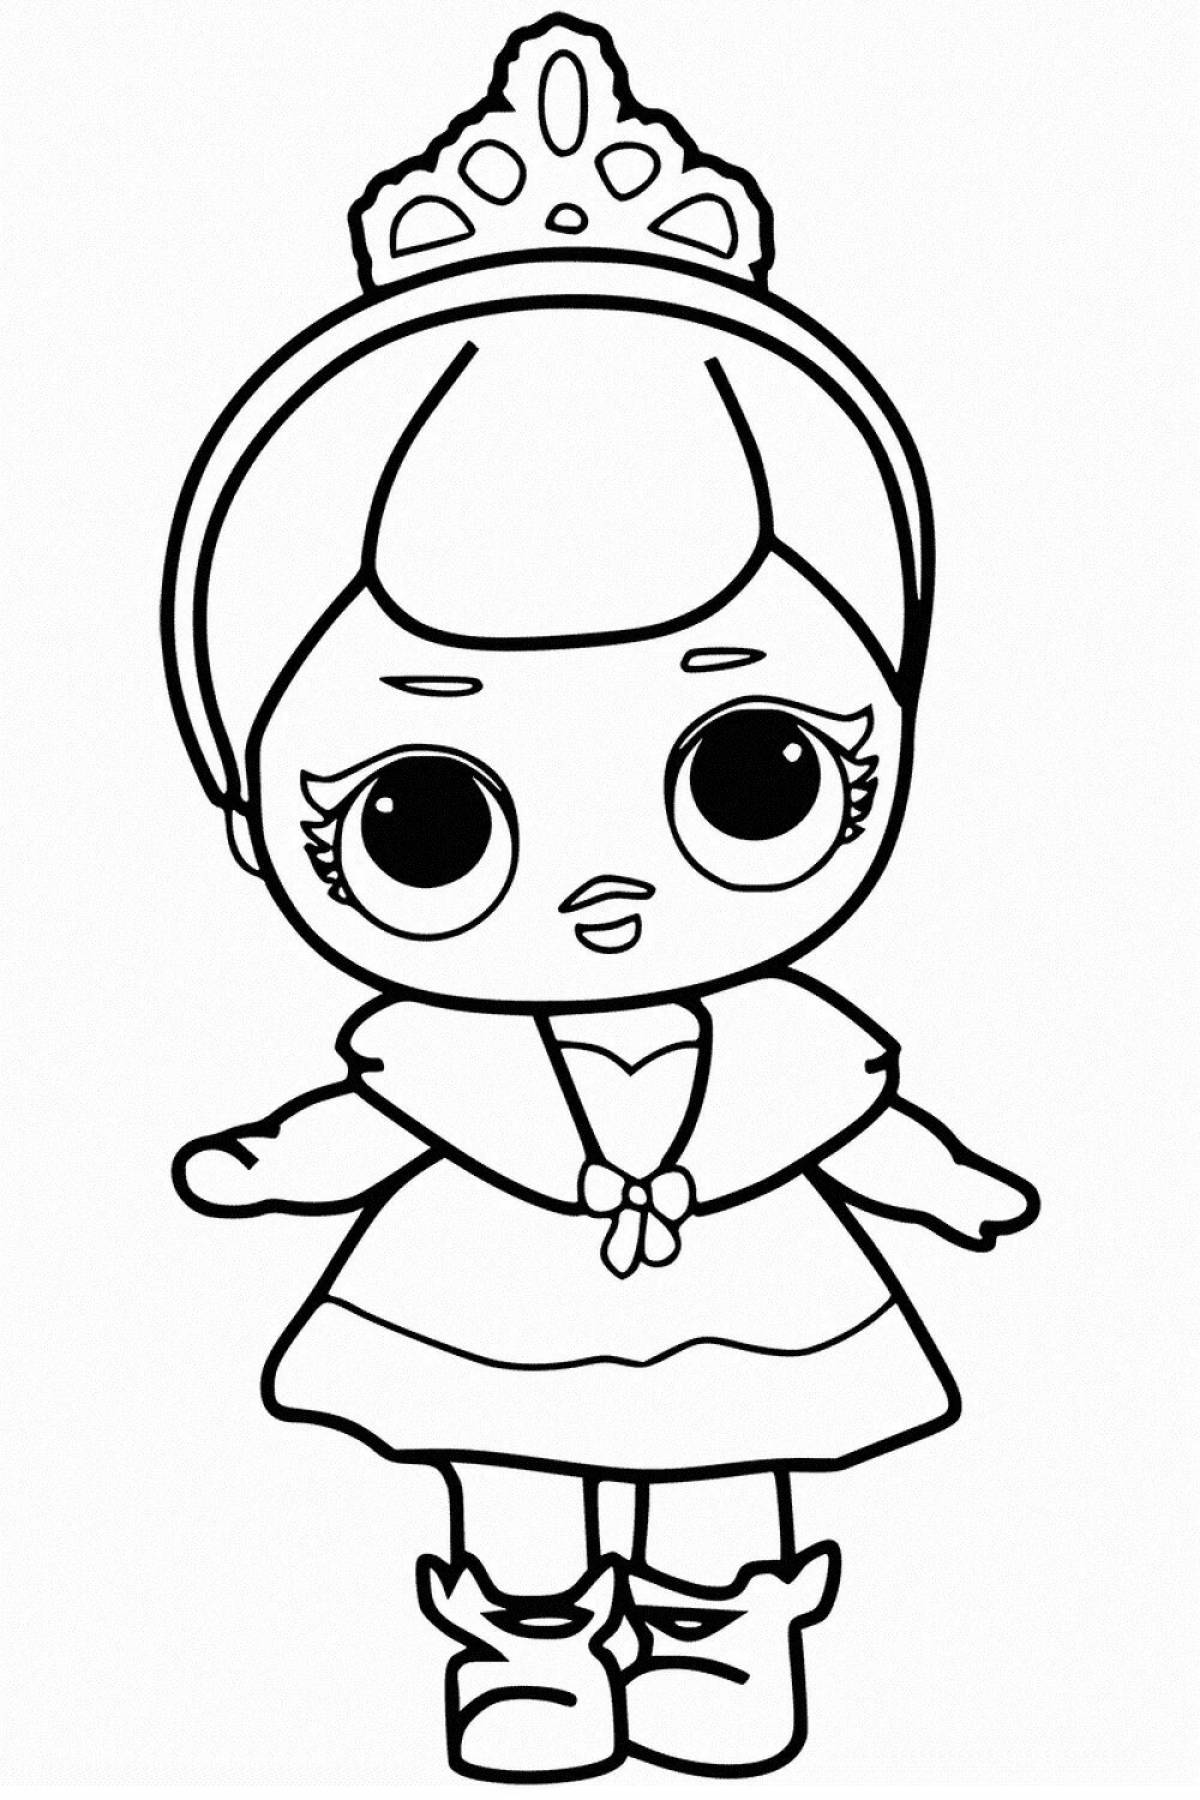 Inspirational Lola Doll Coloring Page for Toddlers